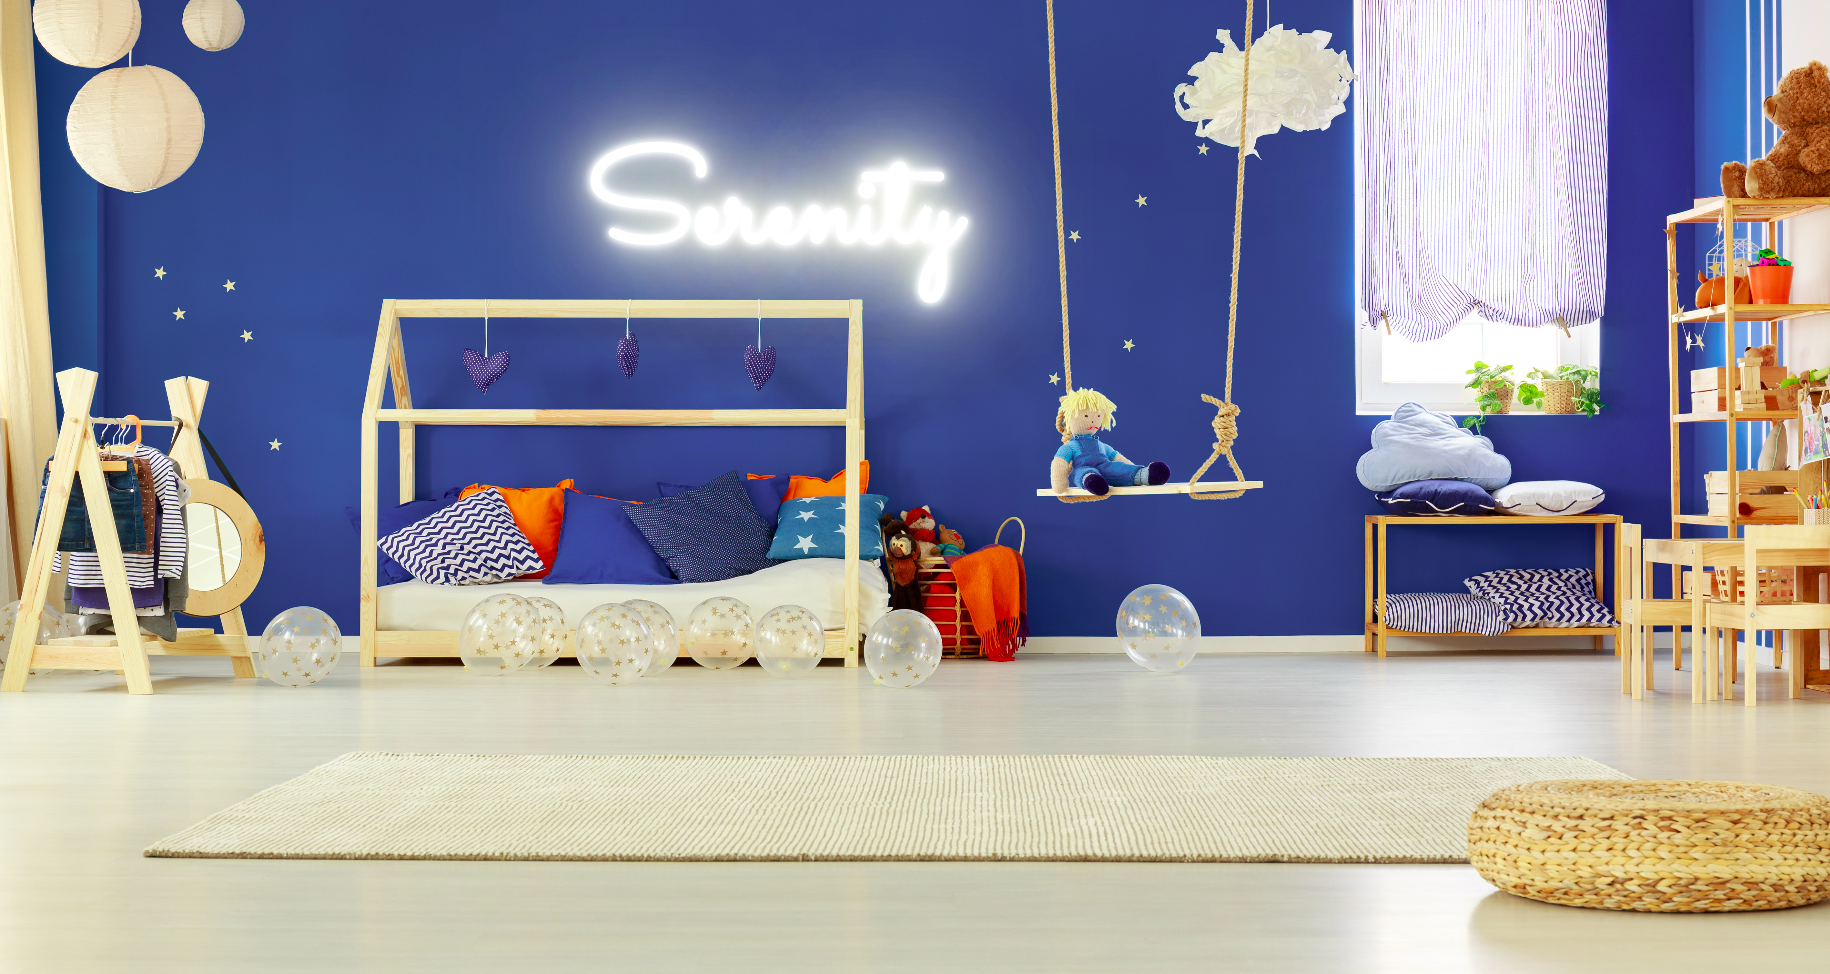 "Serenity" Baby Name LED Neon Sign